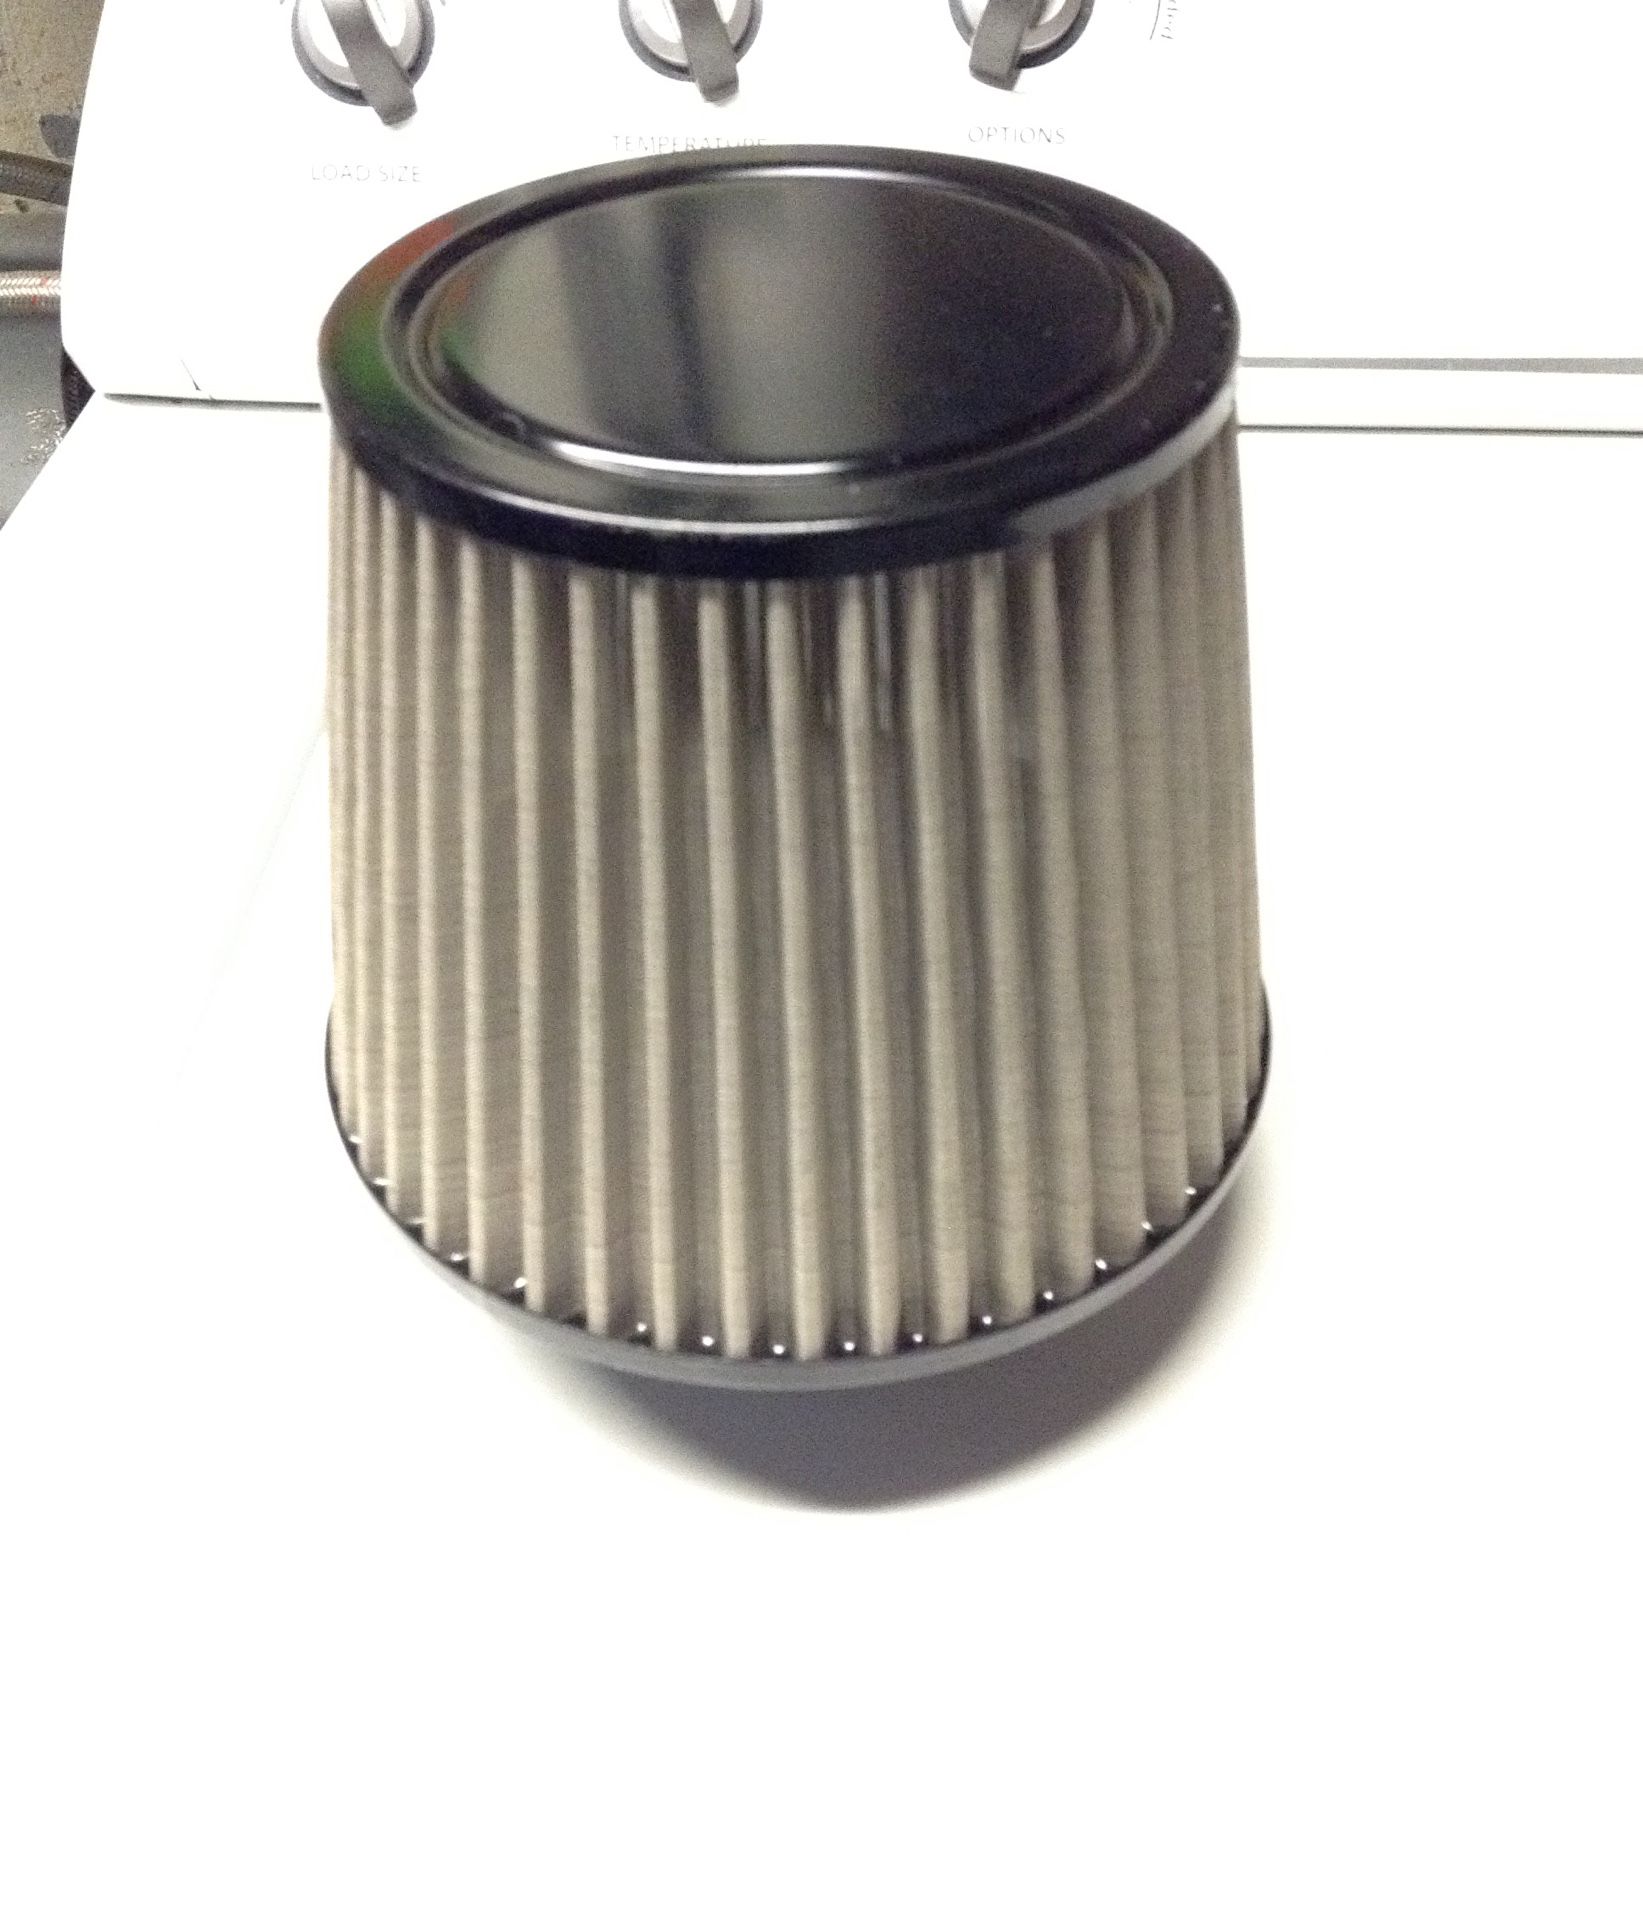 Steel mesh filter for 2.5 inch pipe